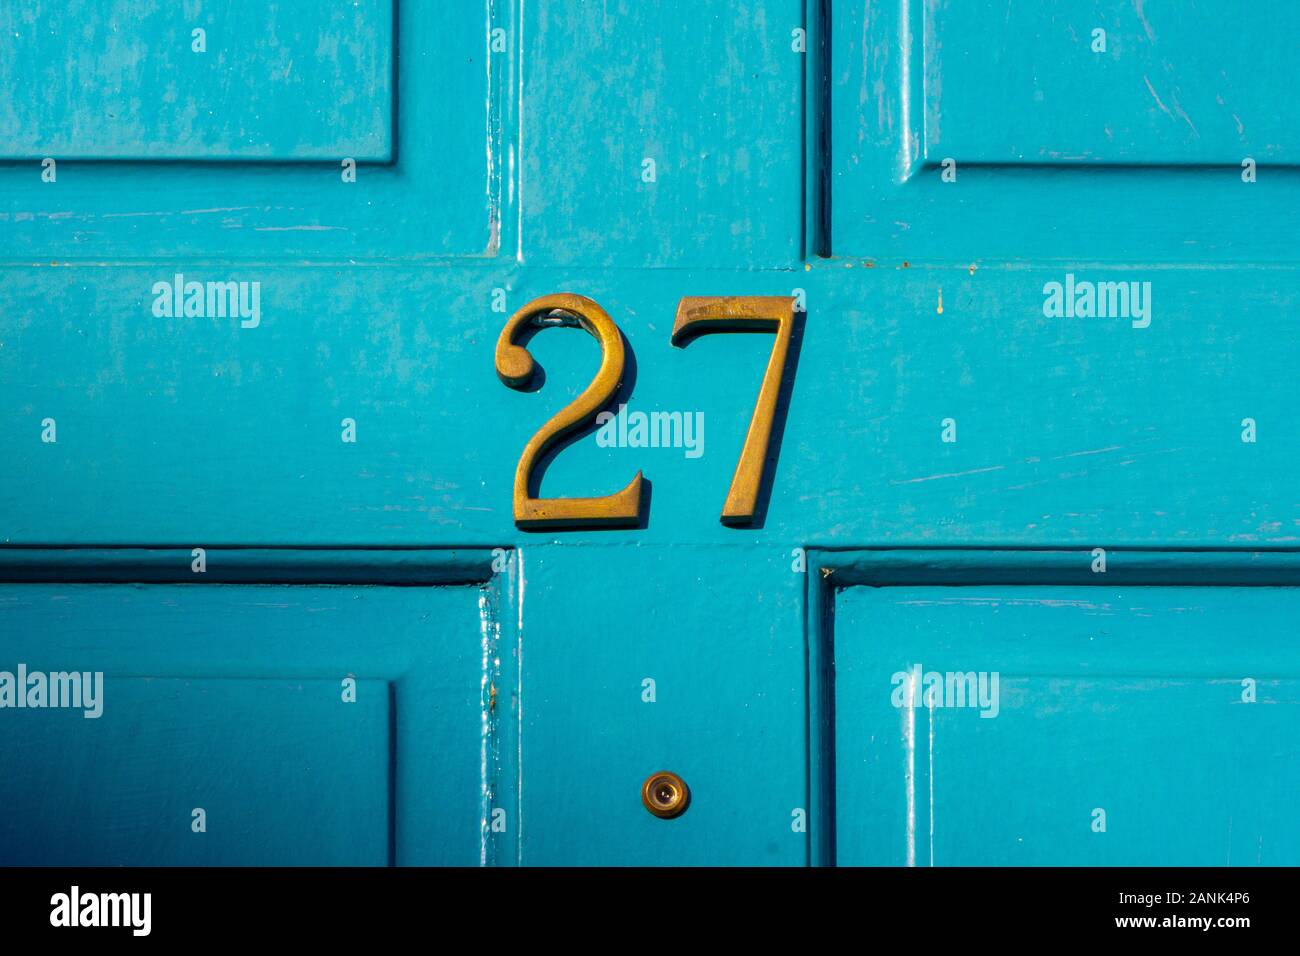 House number 27 Stock Photo